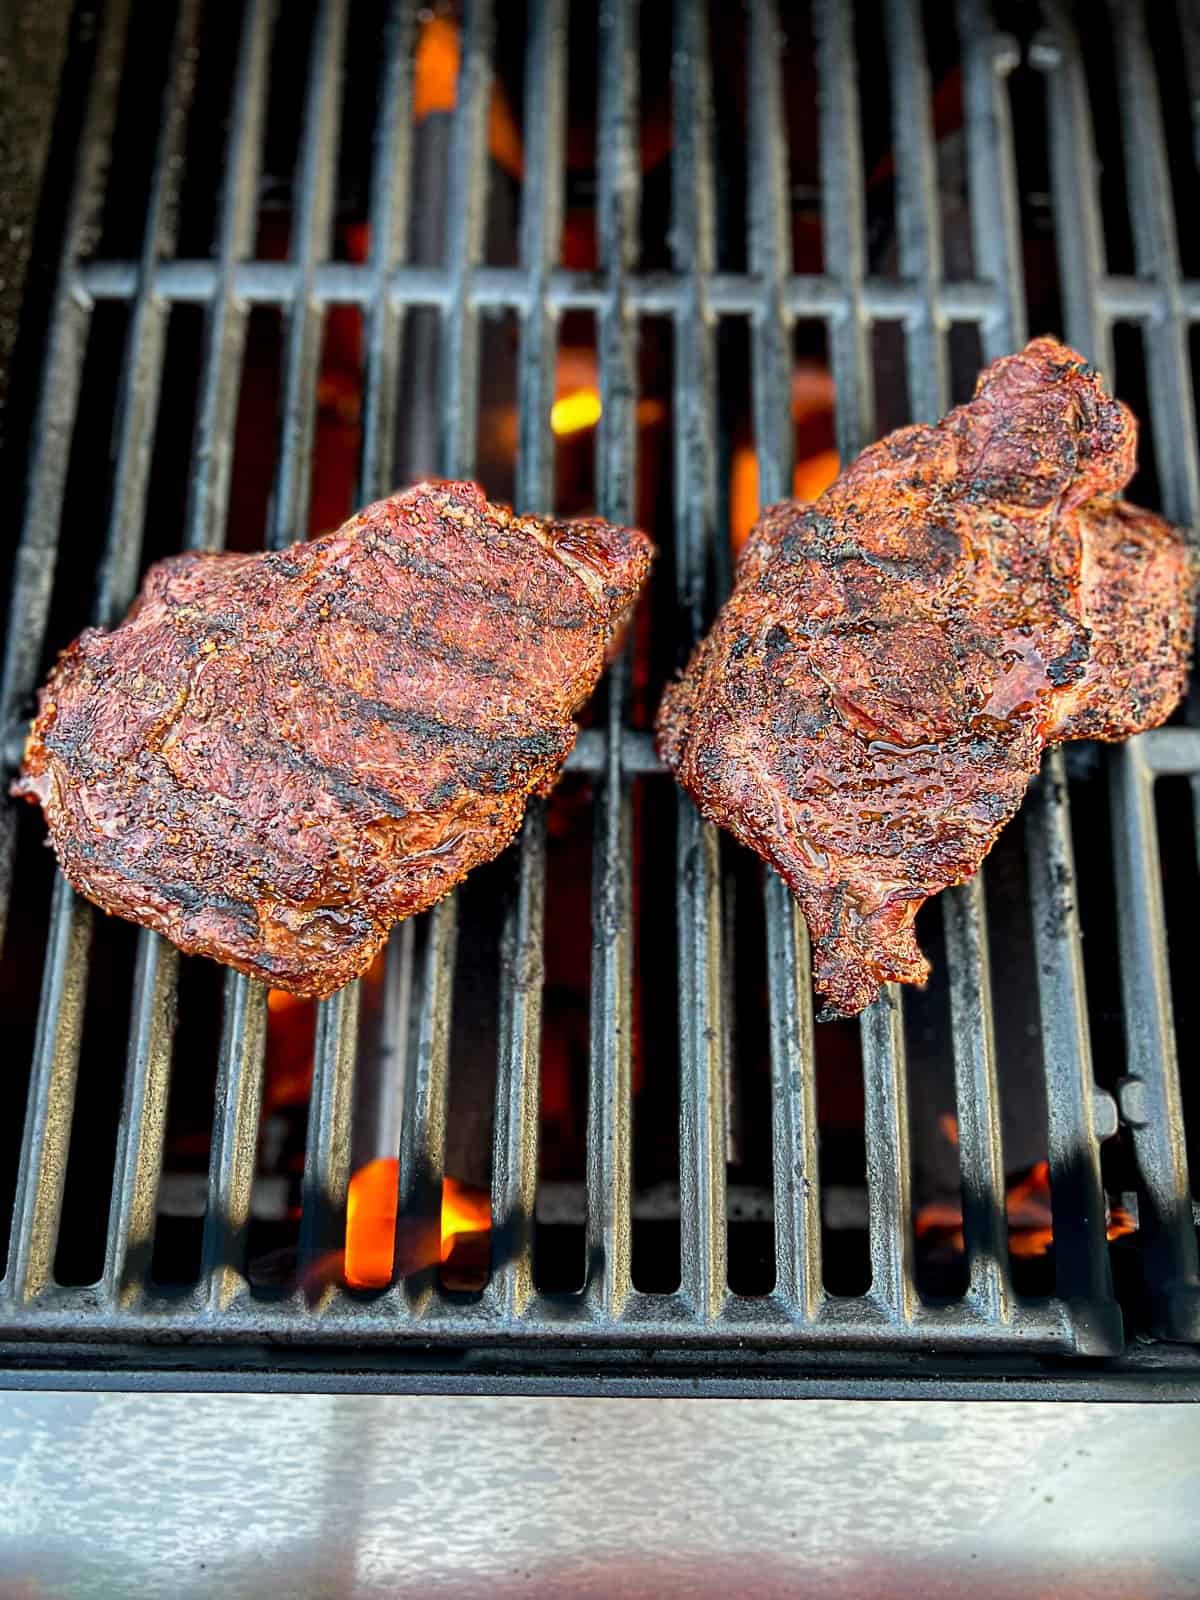 Grilling Ribeye Steaks On Direct Heat Grill Flame